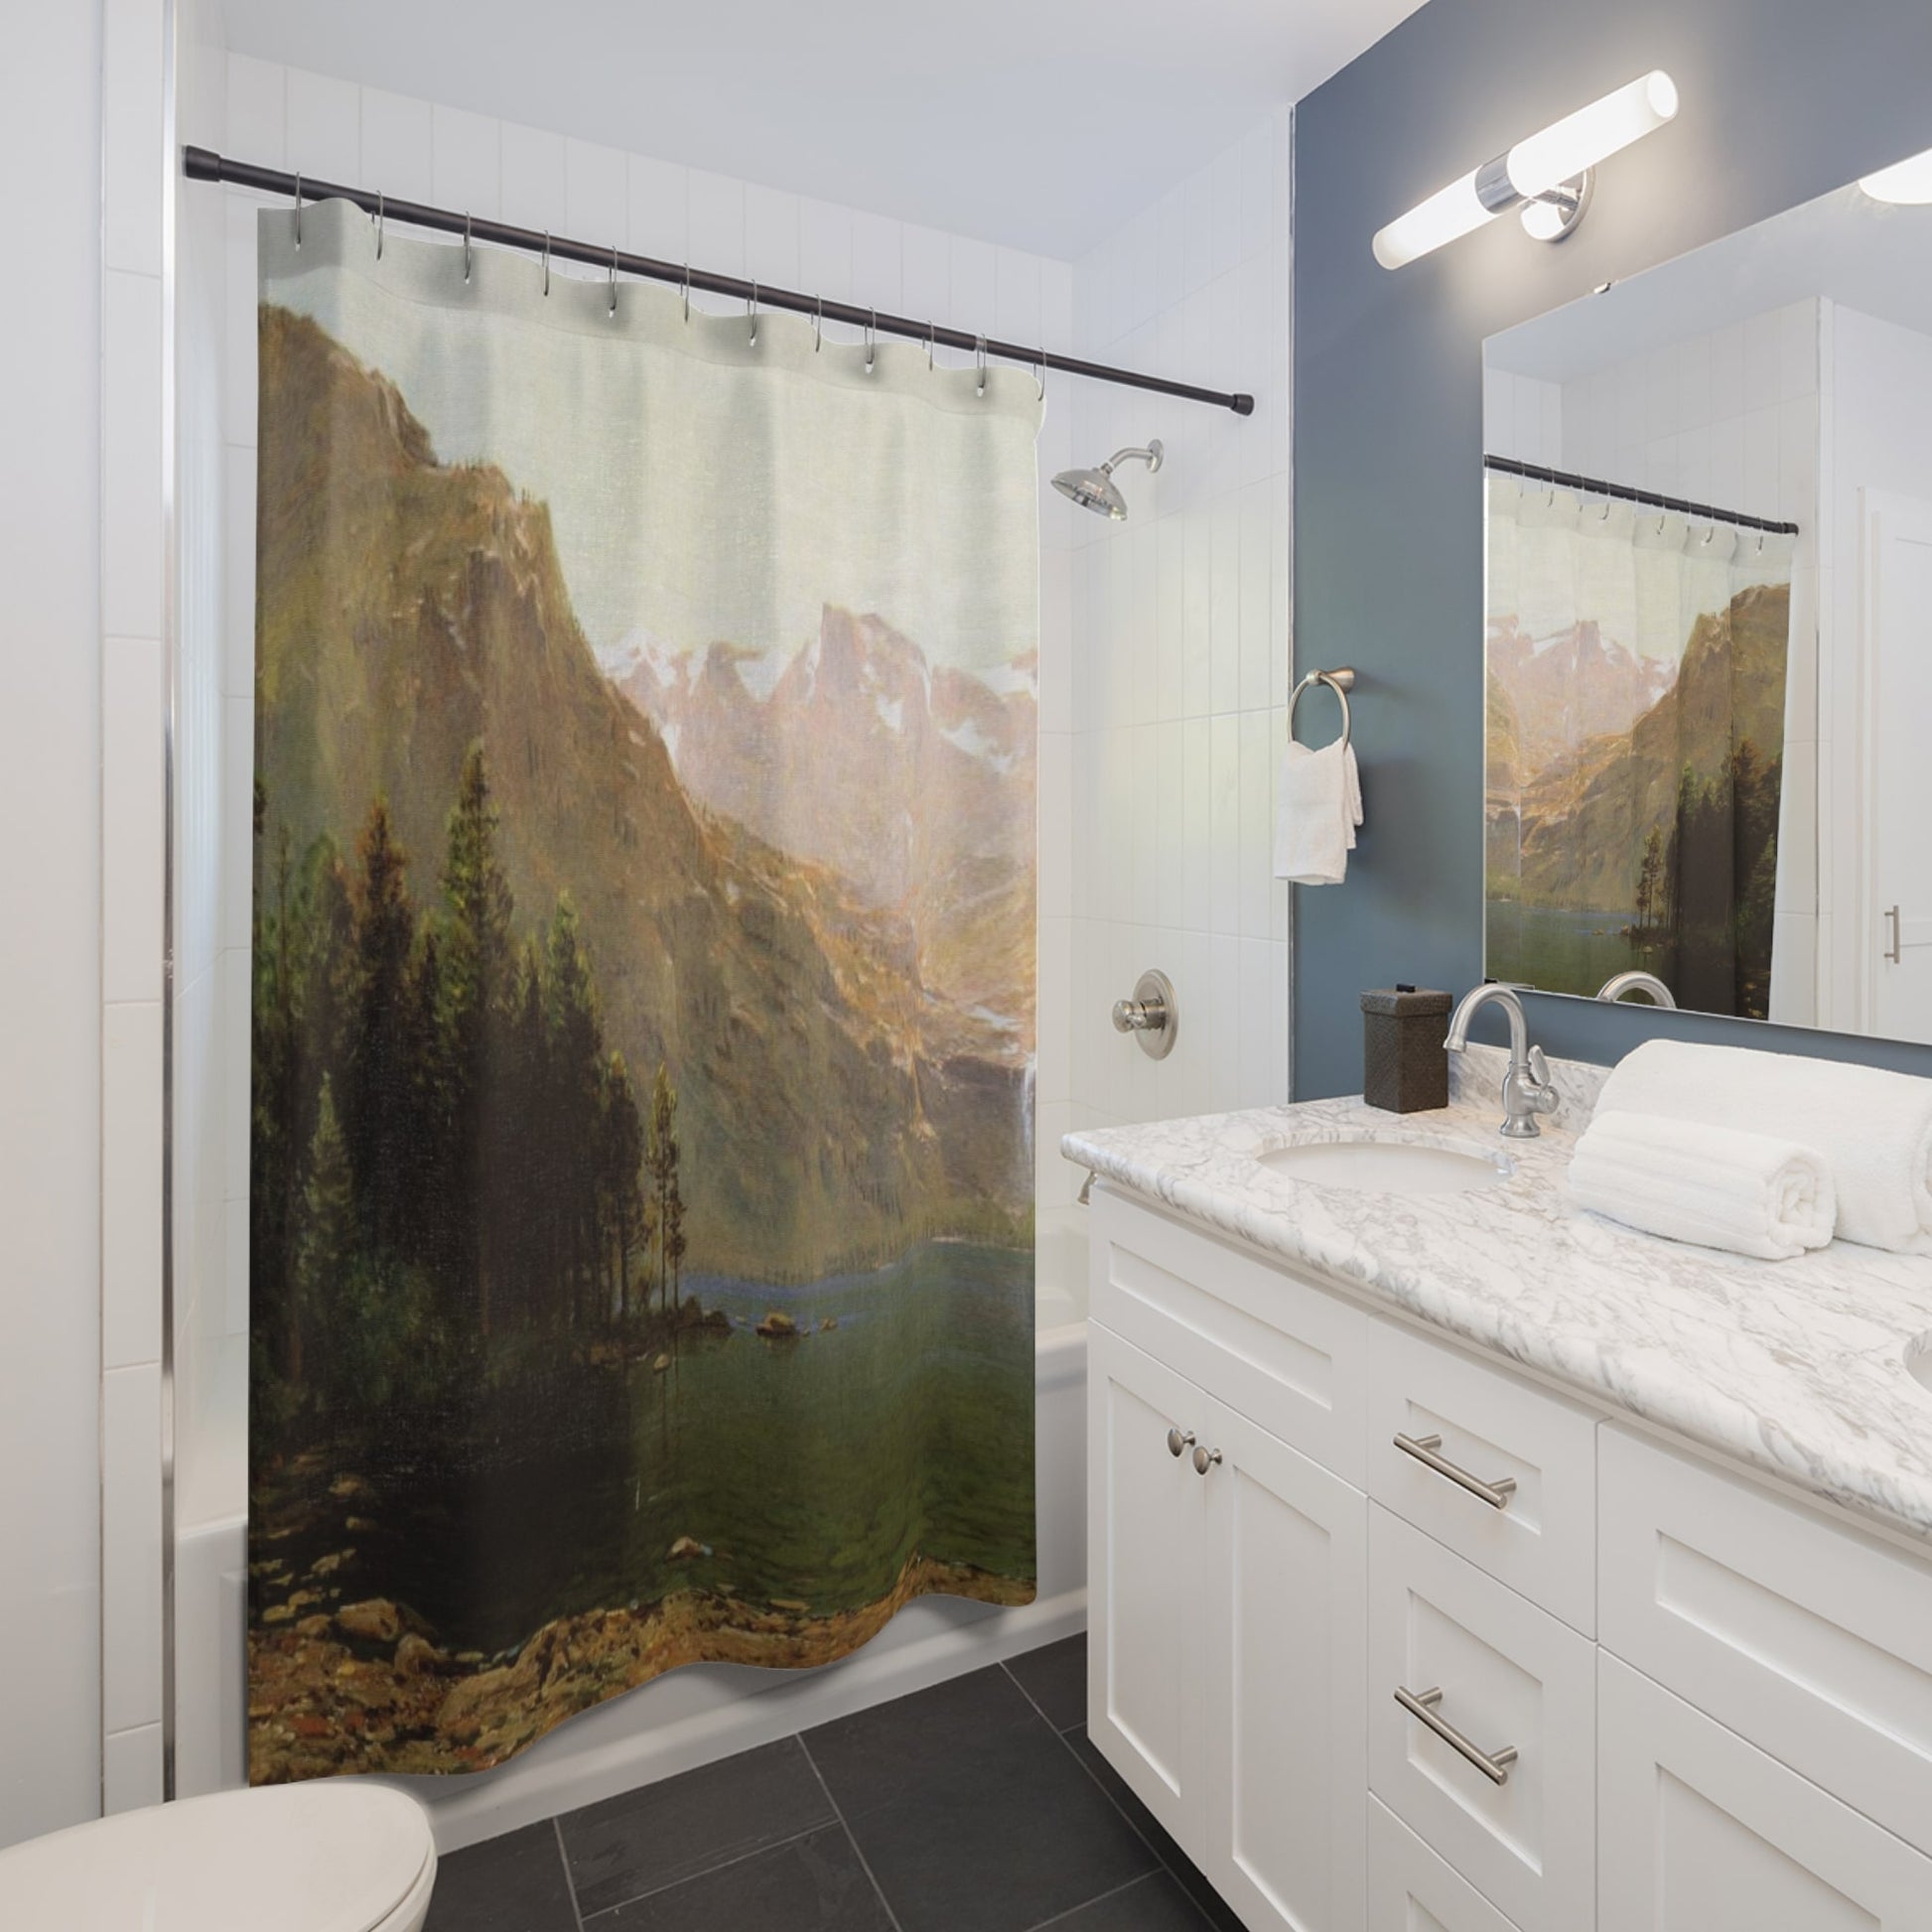 Lake and Mountains Shower Curtain Best Bathroom Decorating Ideas for Landscapes Decor